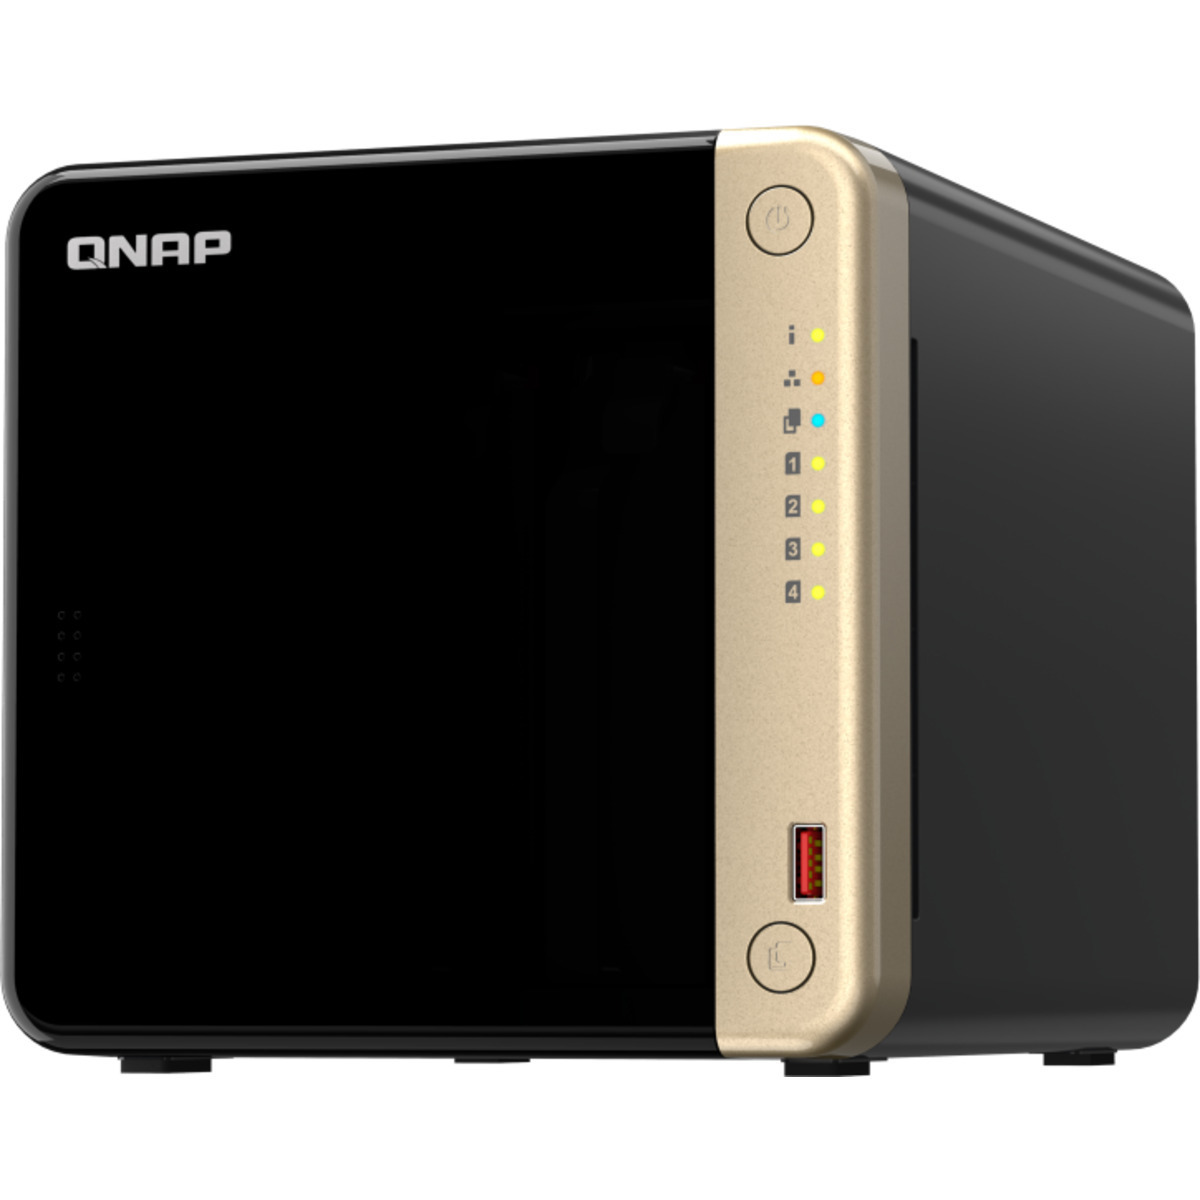 QNAP TS-464 24tb 4-Bay Desktop Multimedia / Power User / Business NAS - Network Attached Storage Device 3x8tb Samsung 870 QVO MZ-77Q8T0 2.5 560/530MB/s SATA 6Gb/s SSD CONSUMER Class Drives Installed - Burn-In Tested TS-464